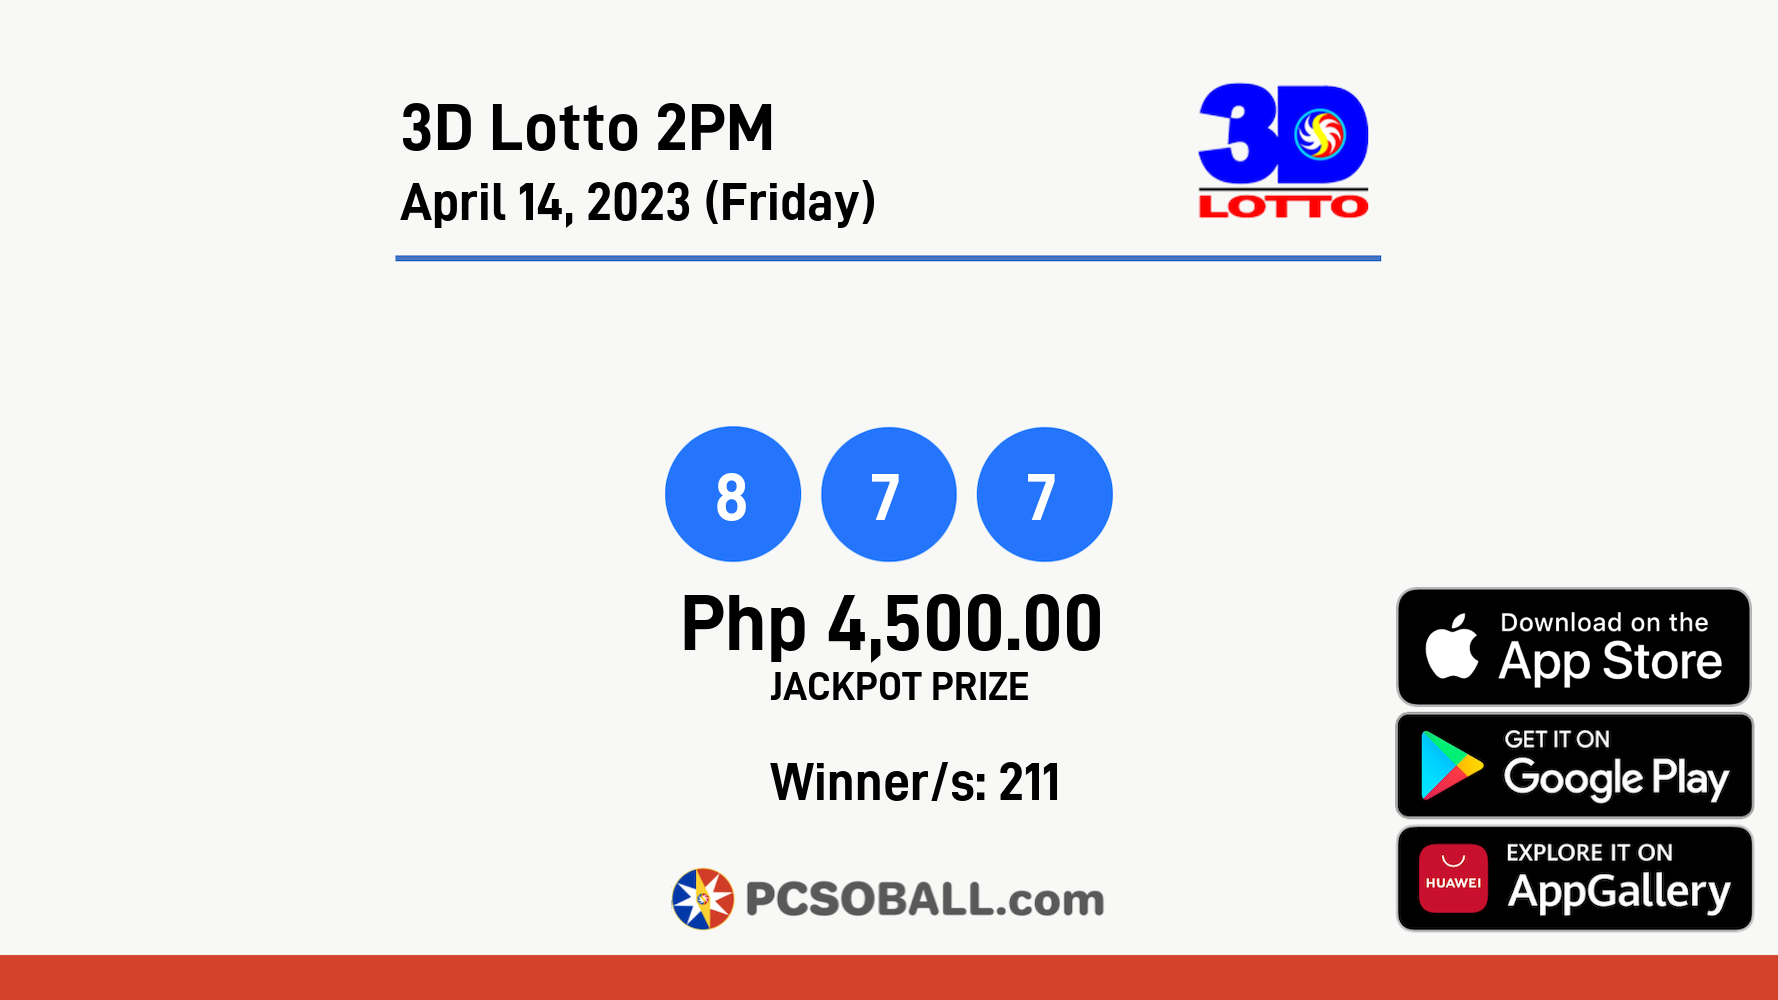 3D Lotto 2PM April 14, 2023 (Friday) Result